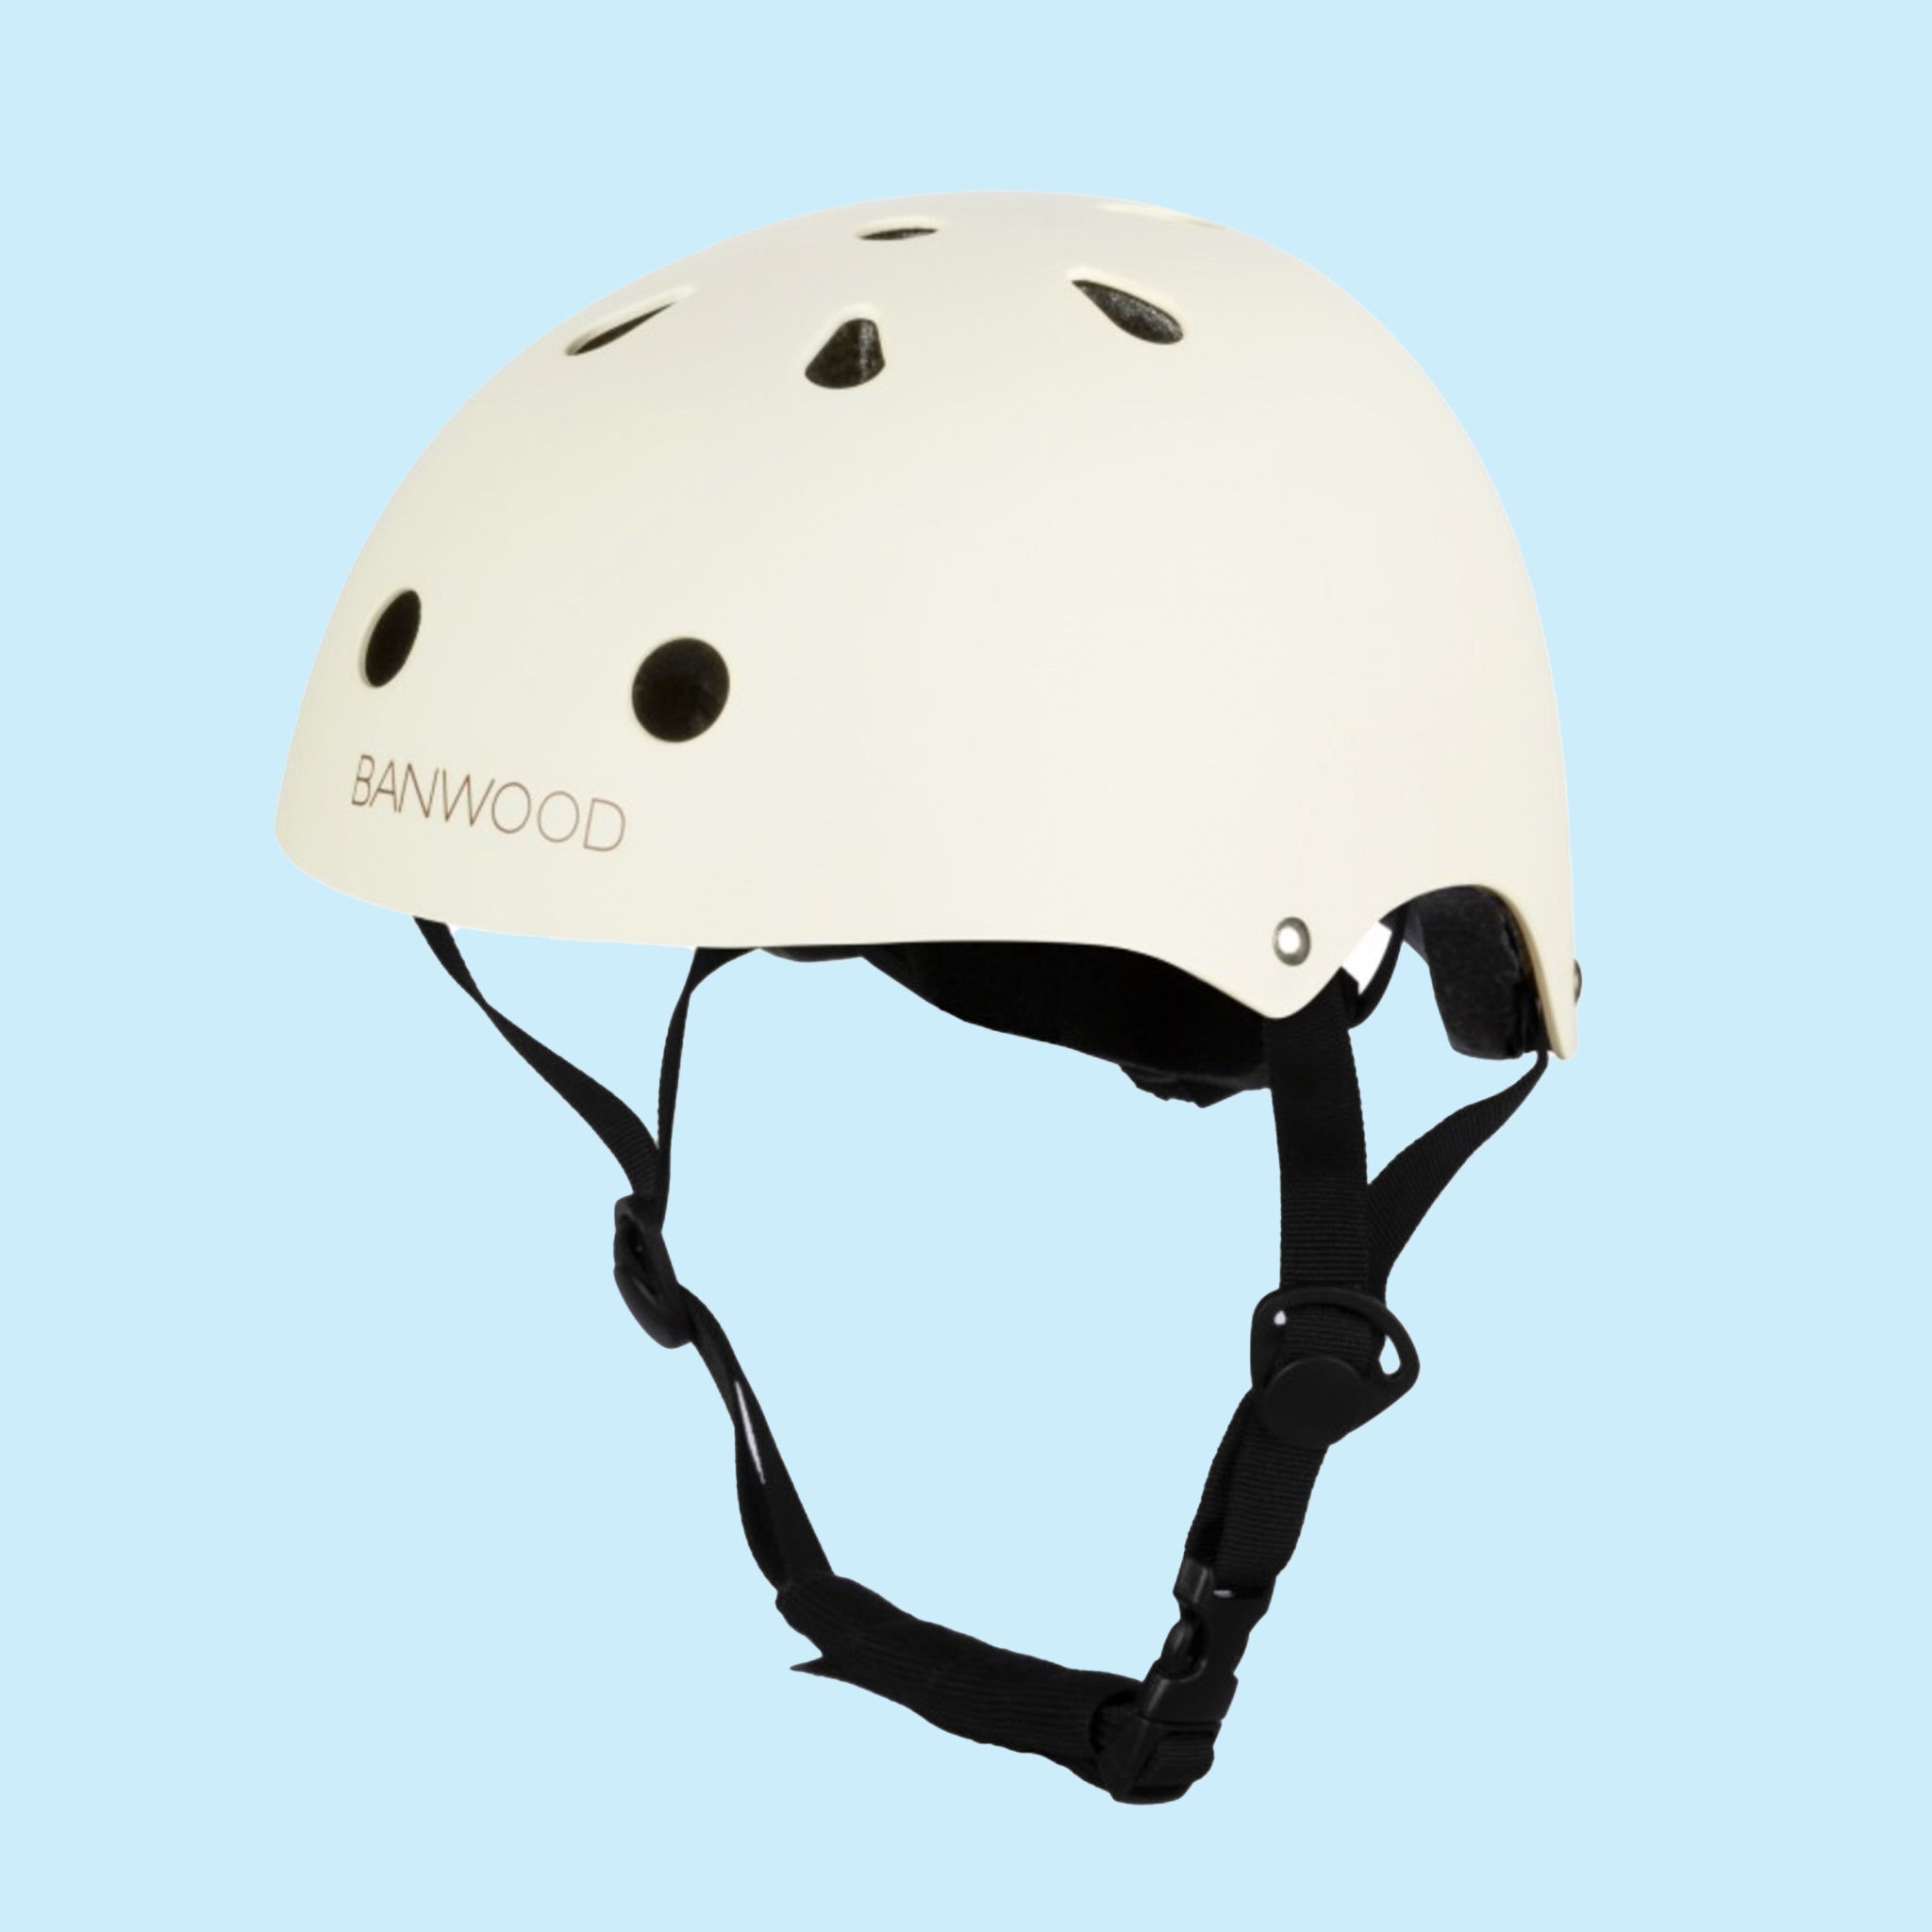 On a blue background is an ivory helmet with a black chin strap. 